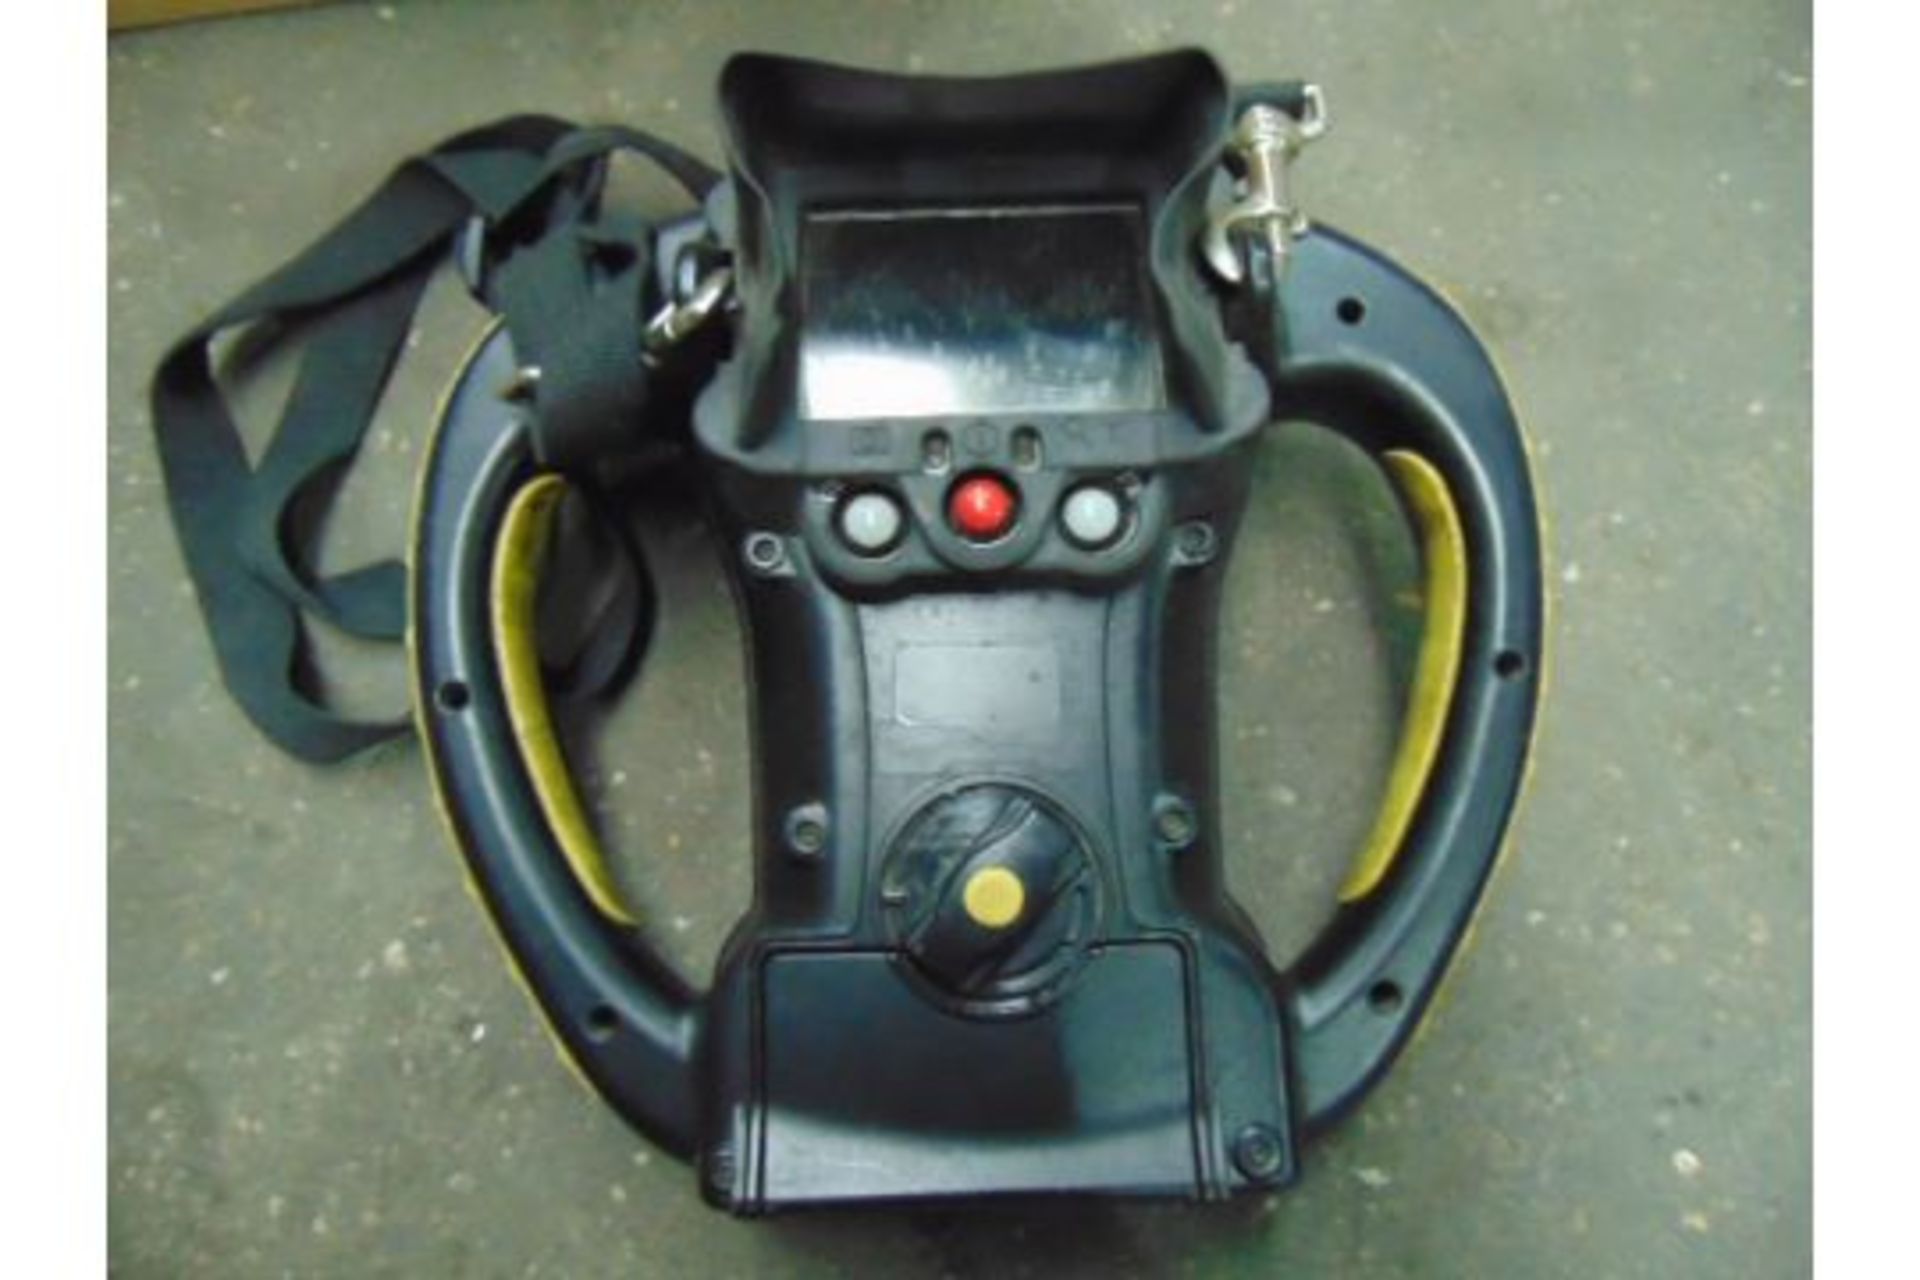 Ex UK Fire Service Argus 3 Thermal Imaging Camera - Image 4 of 5